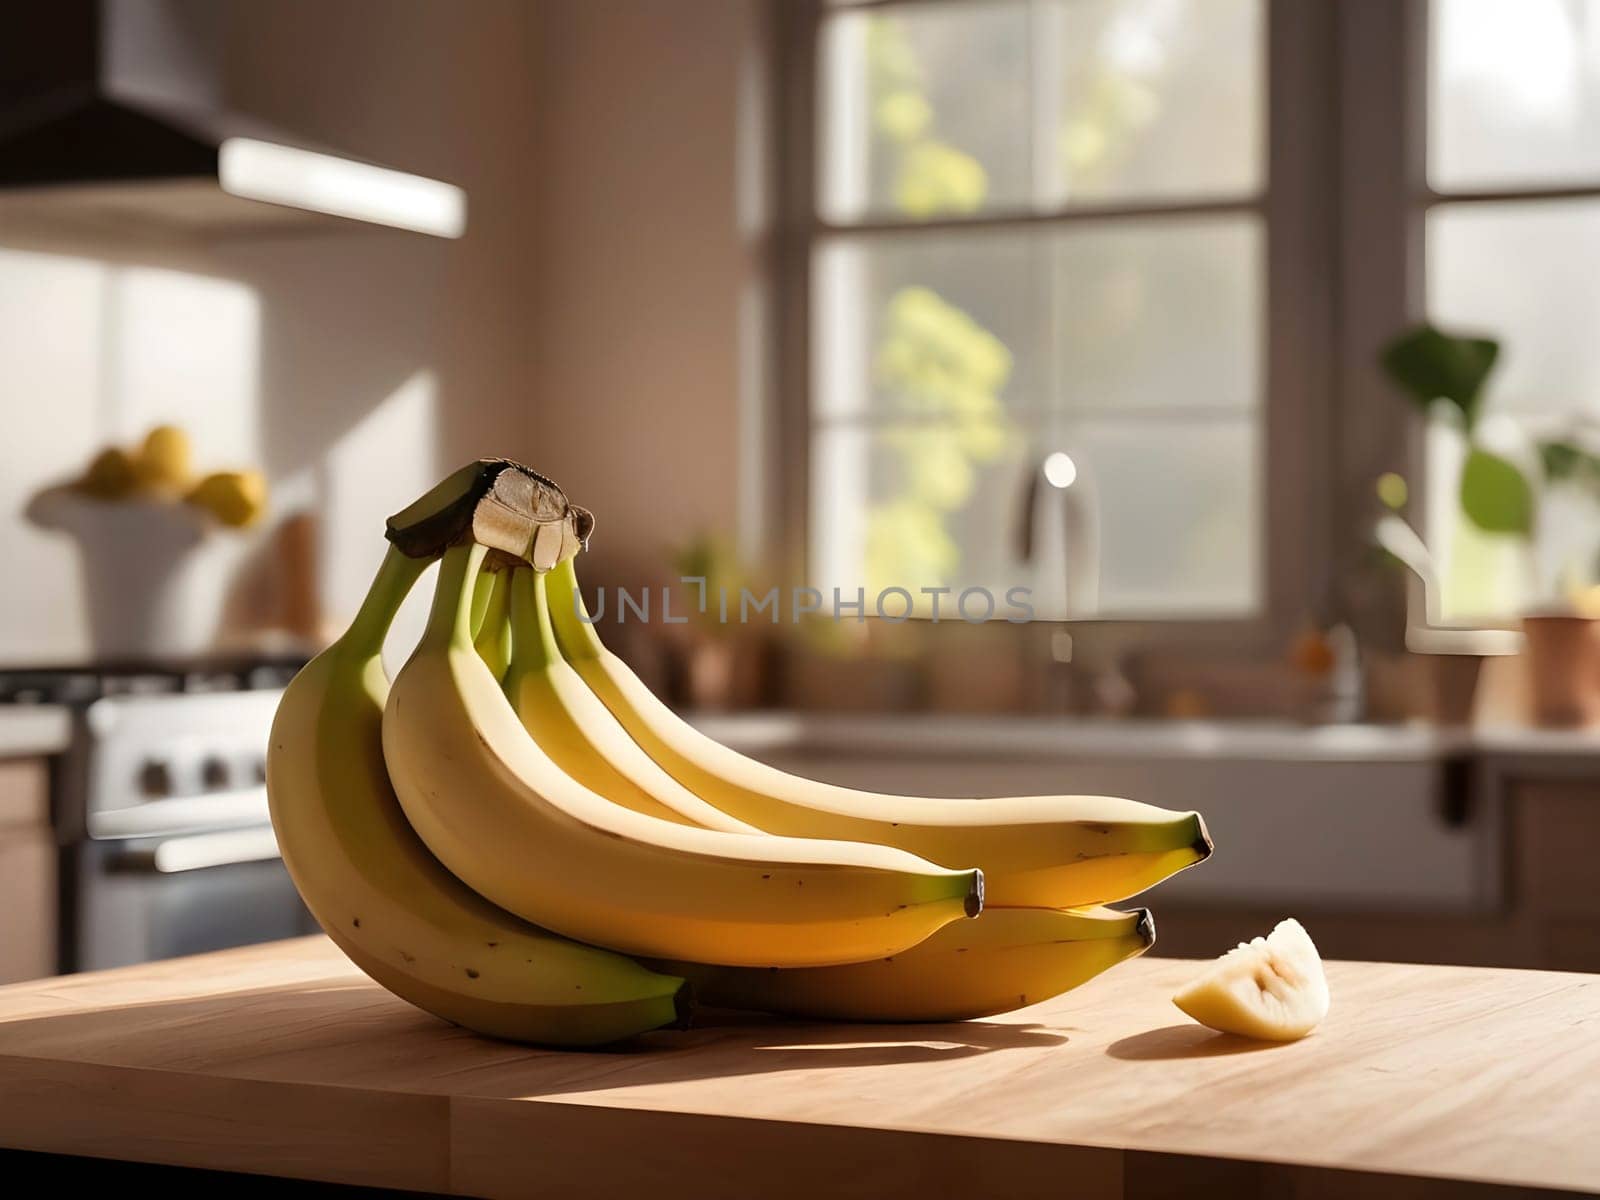 Sunlit Bananas: A Rustic Afternoon on the Wooden Cutting Board by mailos